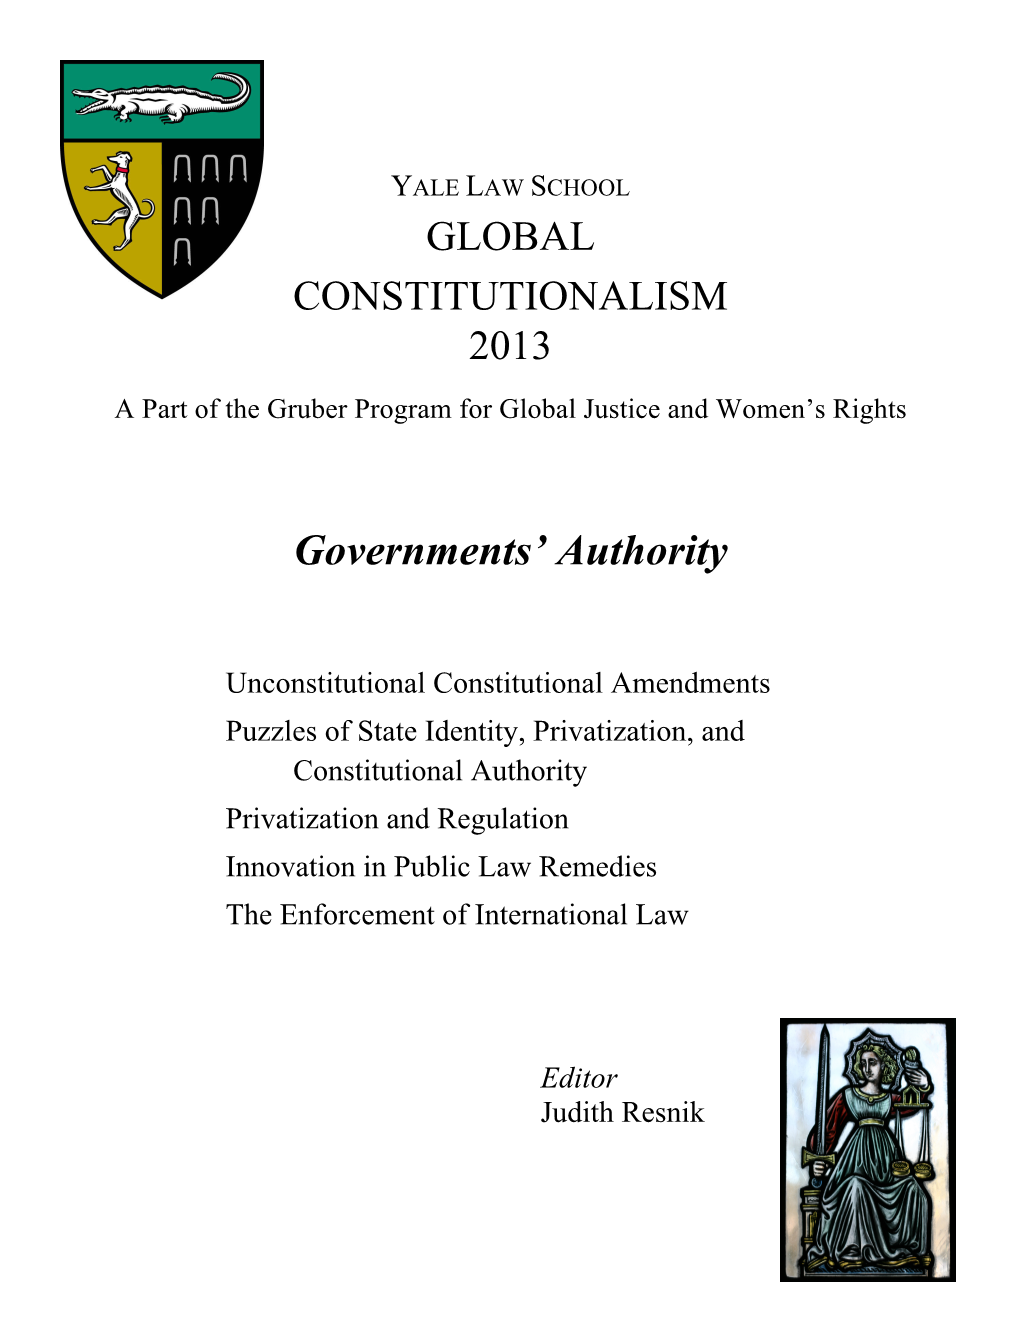 Governments' Authority